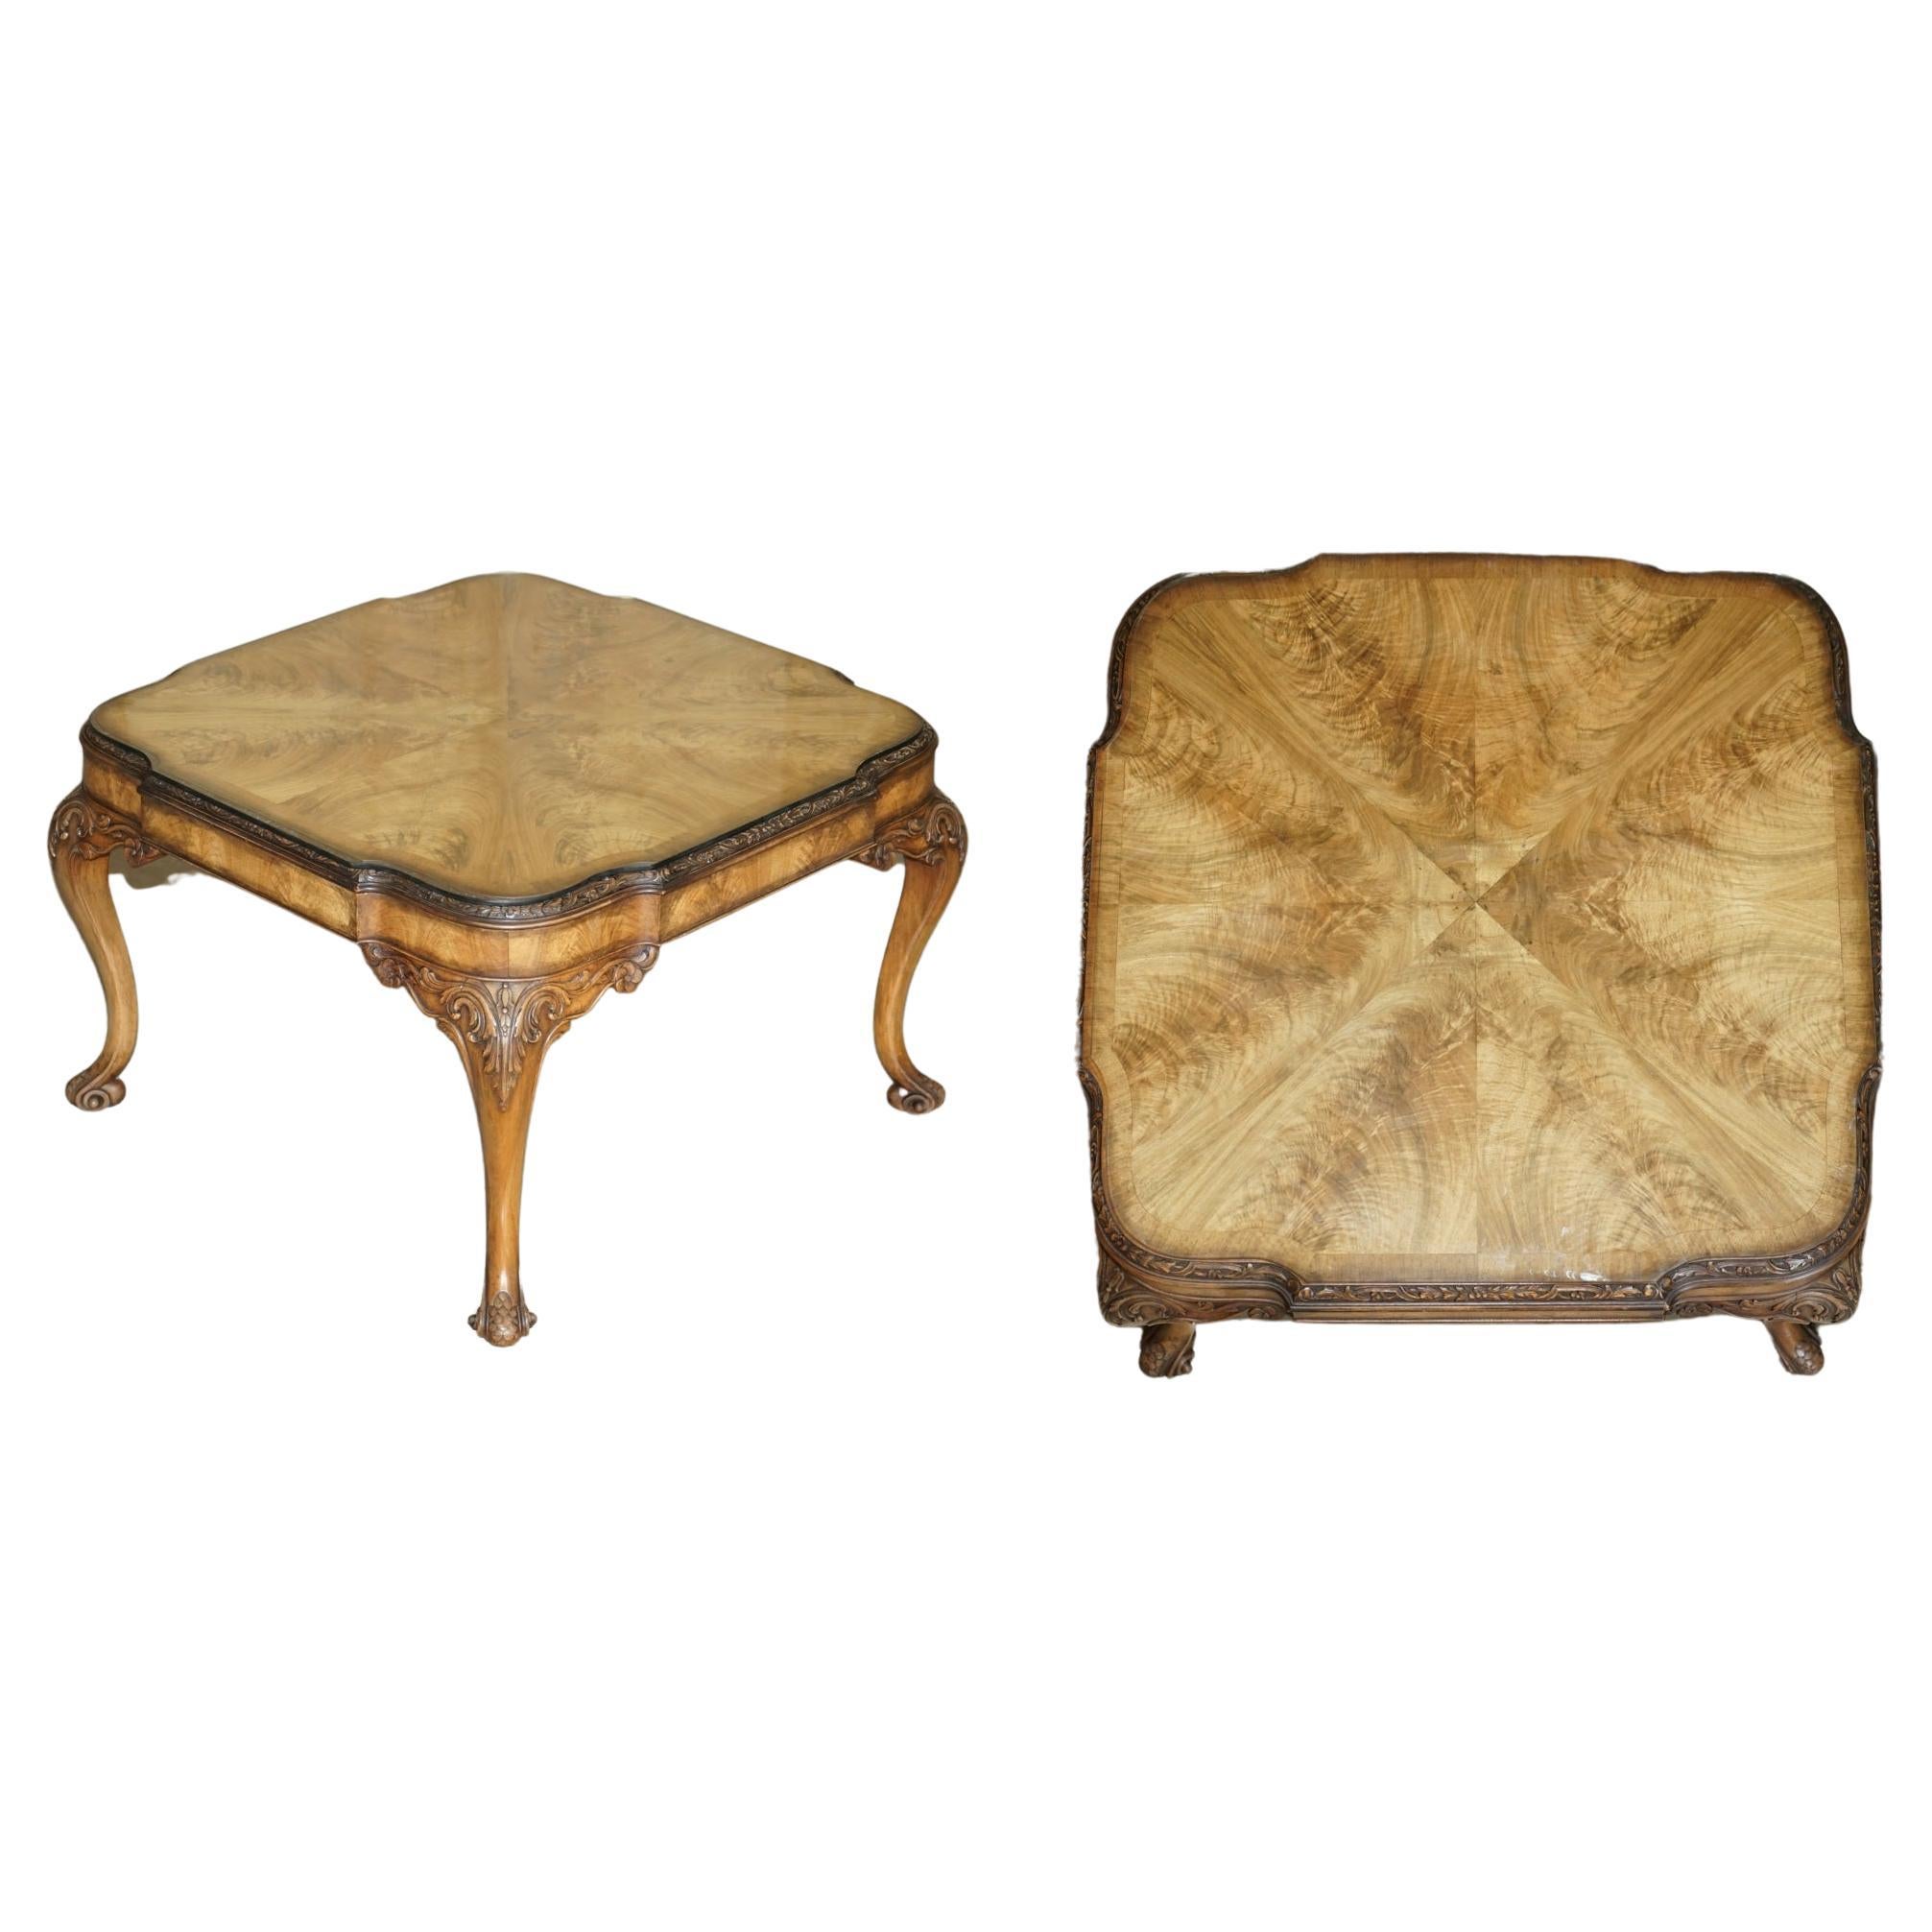 Exquisite Burr Walnut Coffee Cocktail Table with Ornately Carved Cabriole Legs For Sale